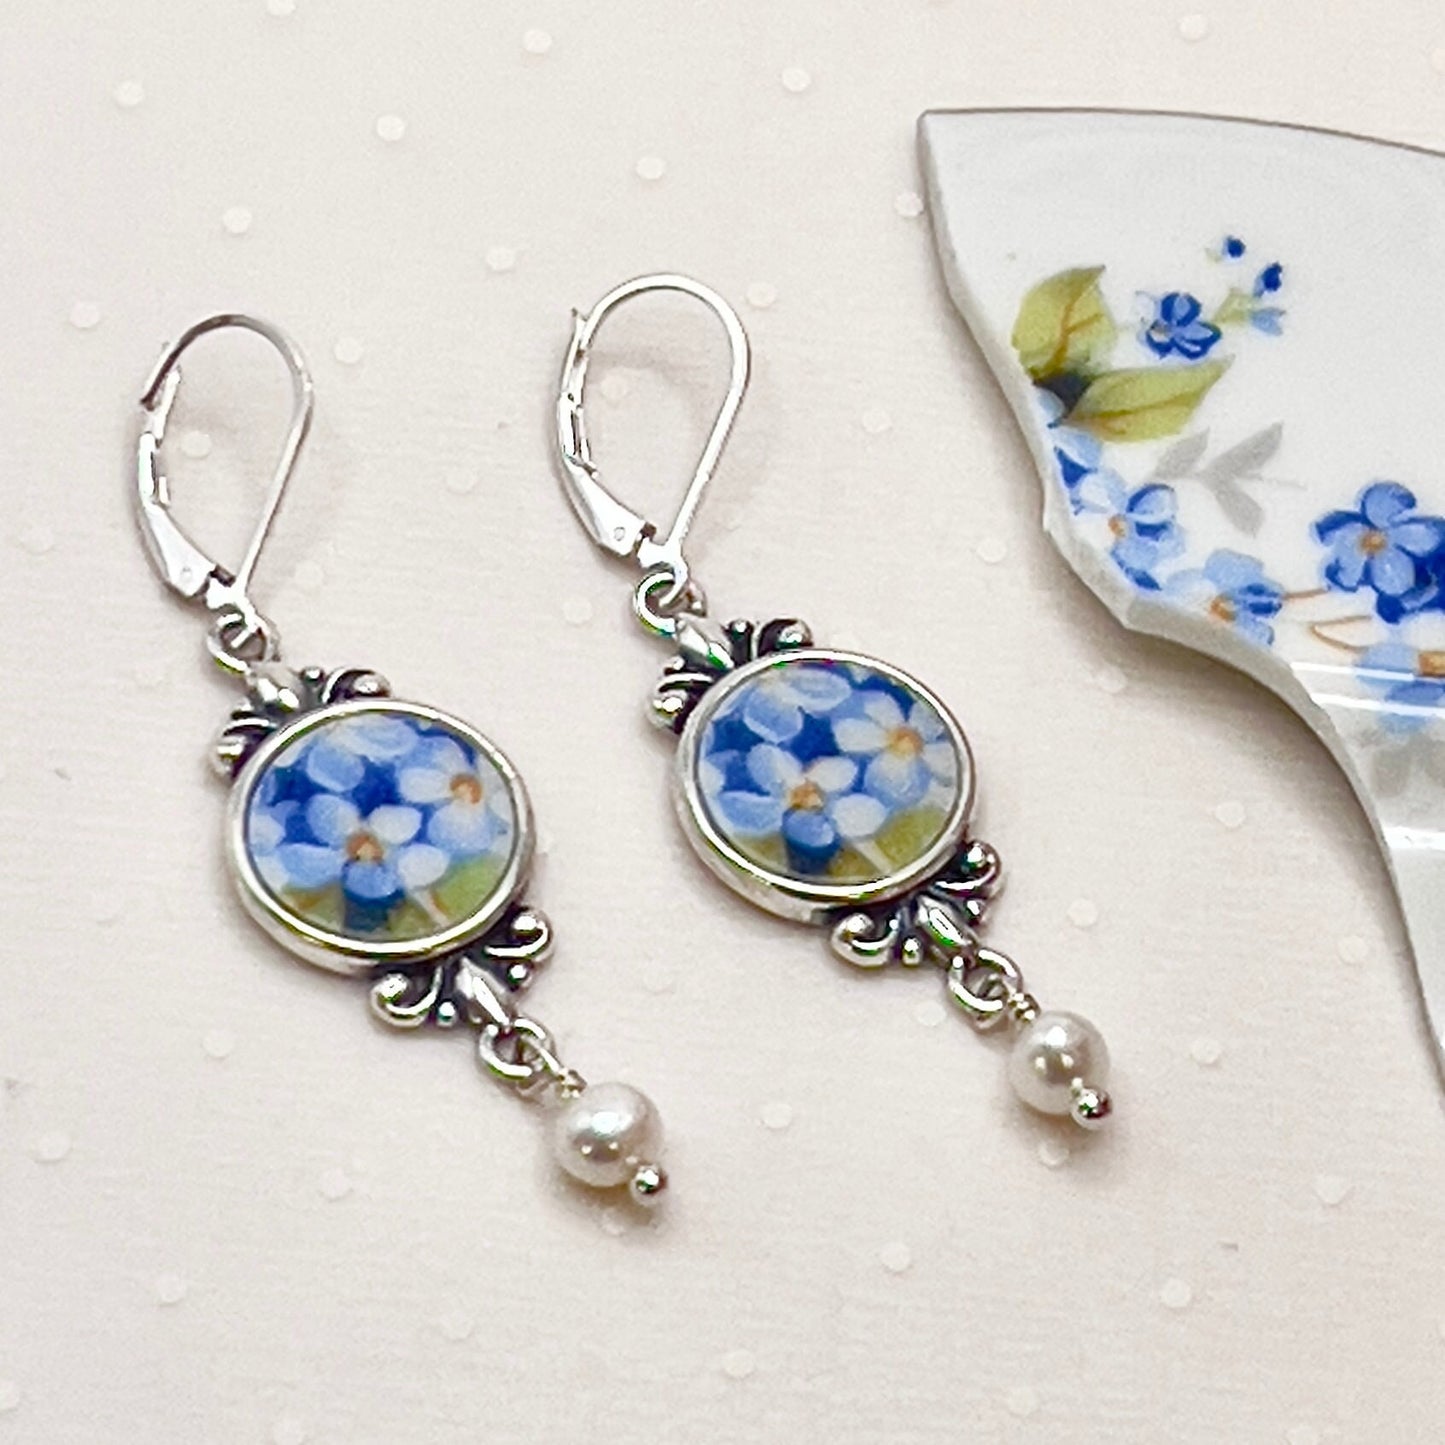 20th Anniversary Gift for Wife, Victorian Broken China Jewelry Earrings, Forget Me Nots